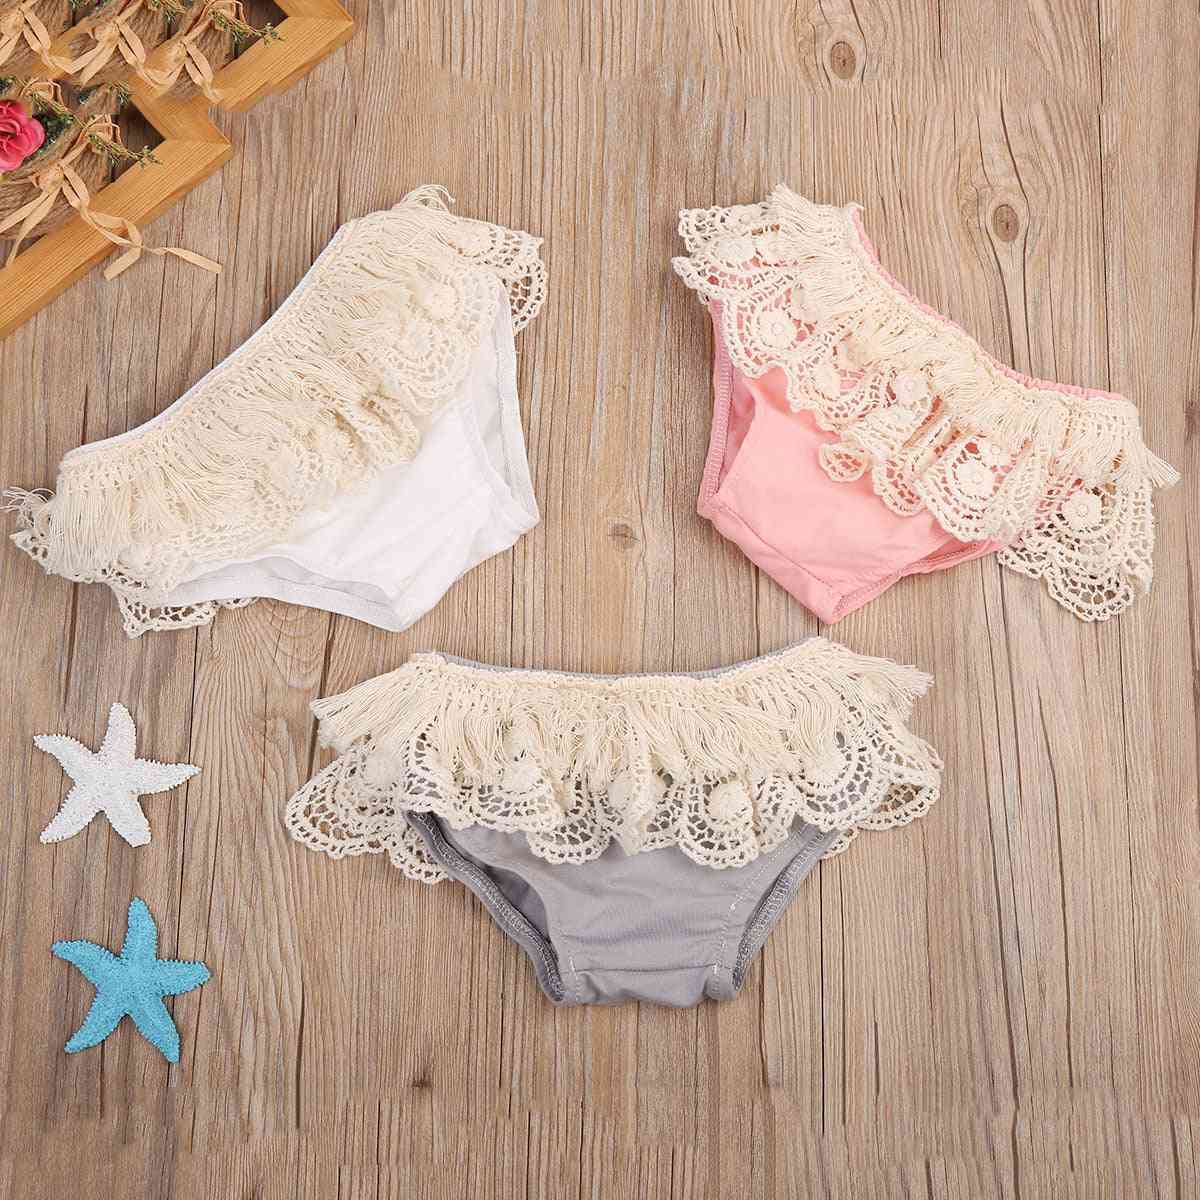 Adorable Newborn Baby Girl Underwear Ruffle Frilly Pp Pants Nappy Cover Sunsuit Diaper